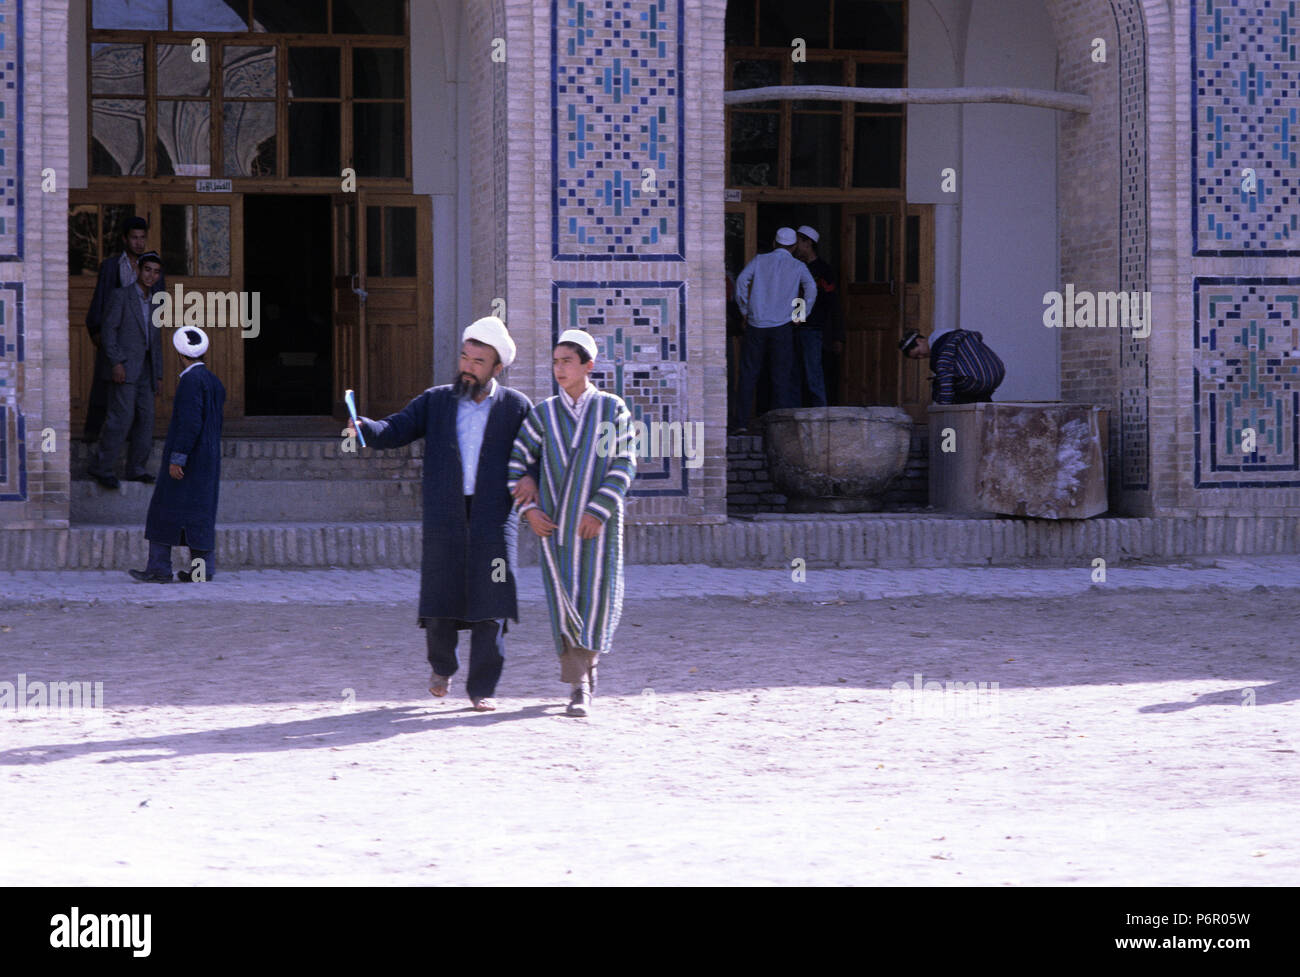 An Islamic teacher and one of his students in the courtyard of a madrasah in Bukhara, undated photo from October 1992. The largely Islamic center of Bukhara was declared a UNESCO World Heritage Site in 1993, and the state of Uzbekistan gained its independence after the collapse of the Soviet Union on 01.09.1991. Photo: Matthias Toedt/dpa central image/ZB/picture alliance | usage worldwide Stock Photo